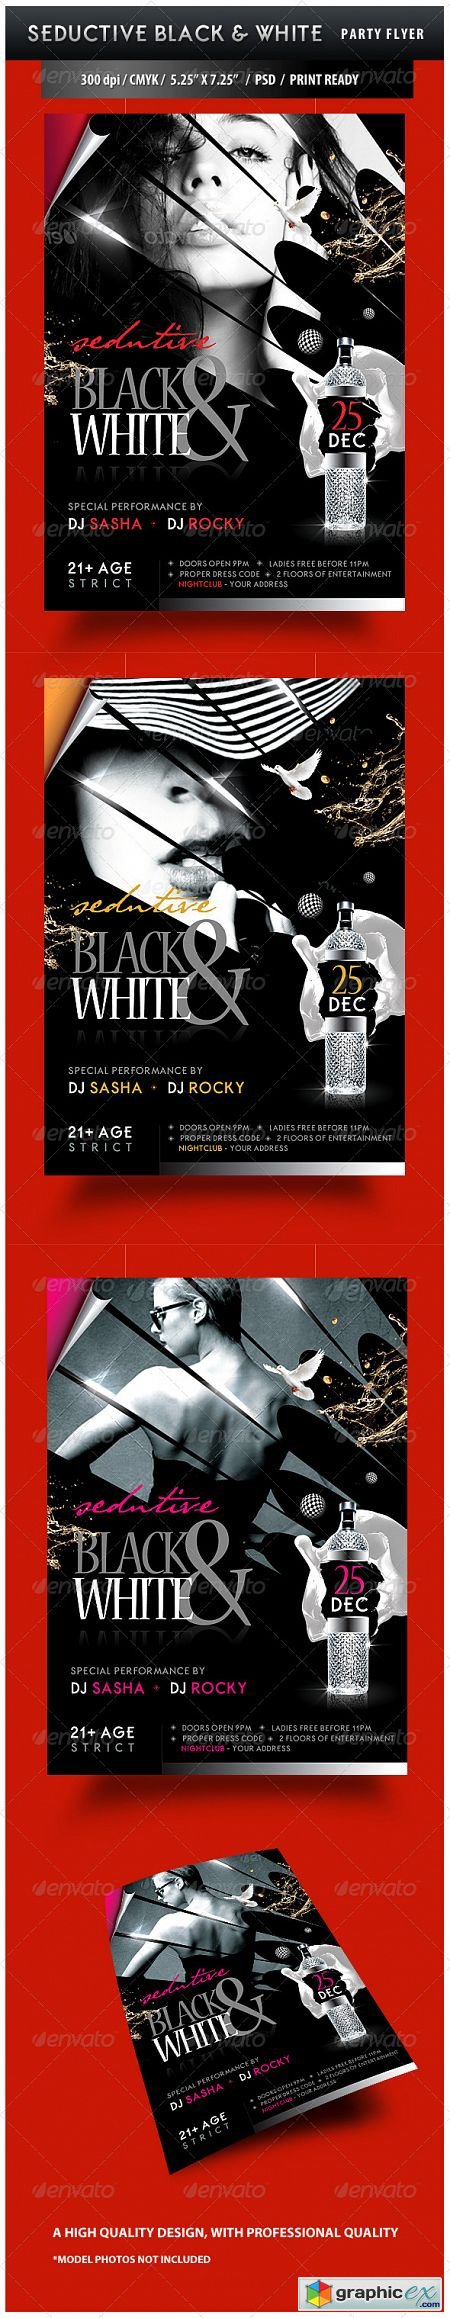 Seductive Black and White Party Flyer